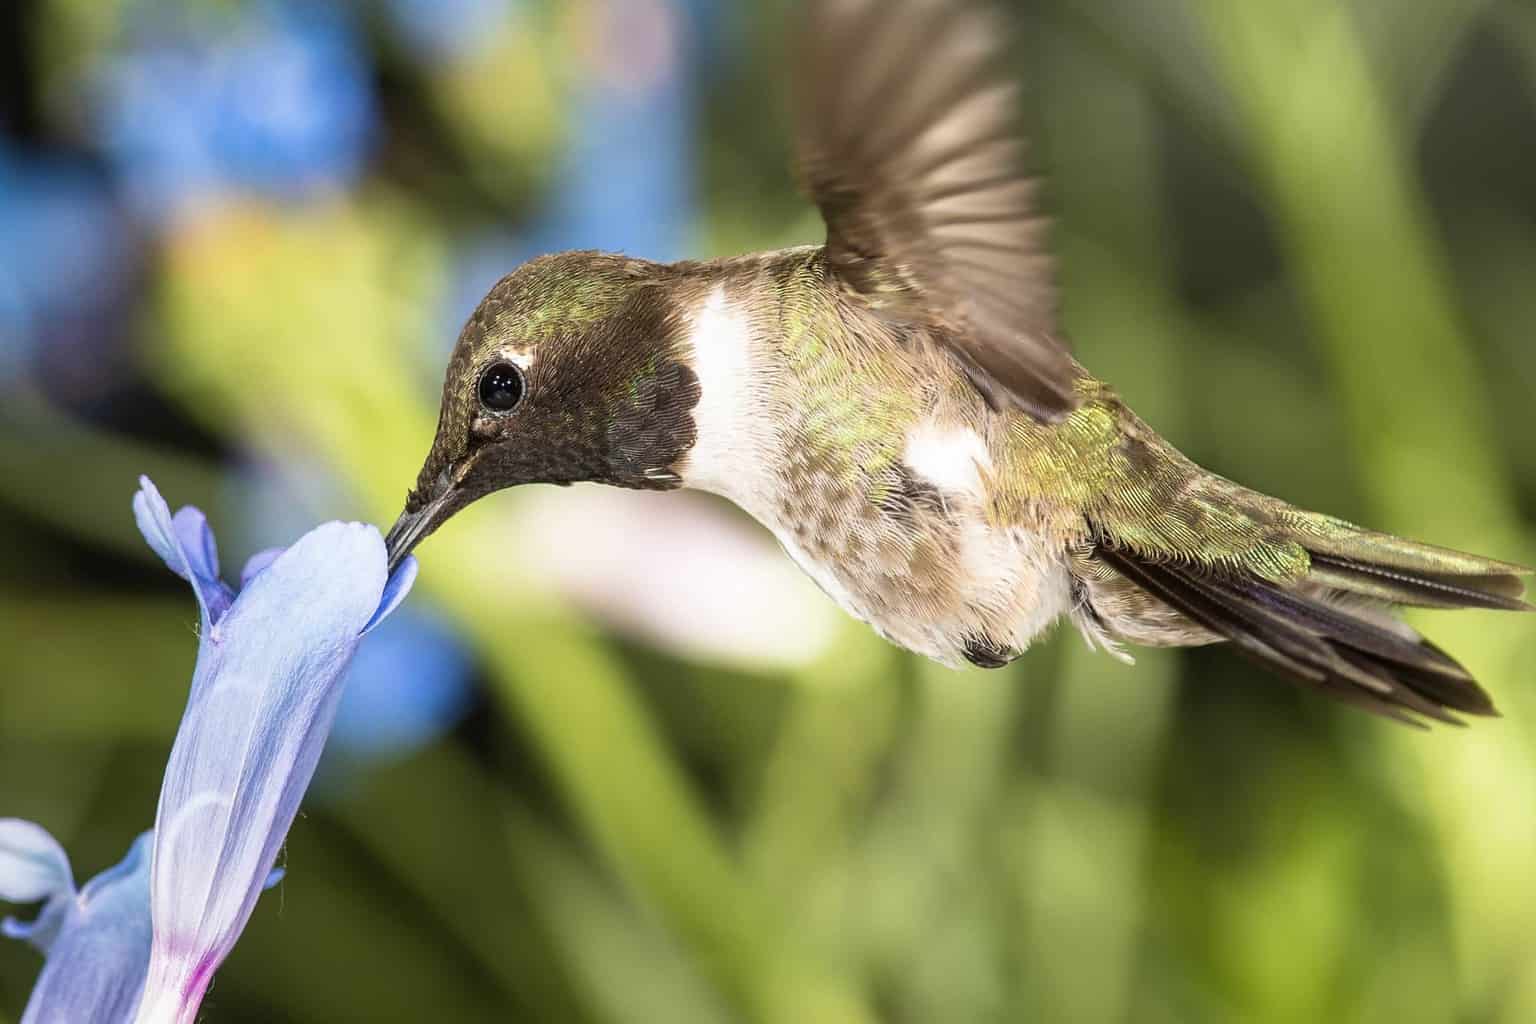 when do hummingbirds arrive in and leave michigan